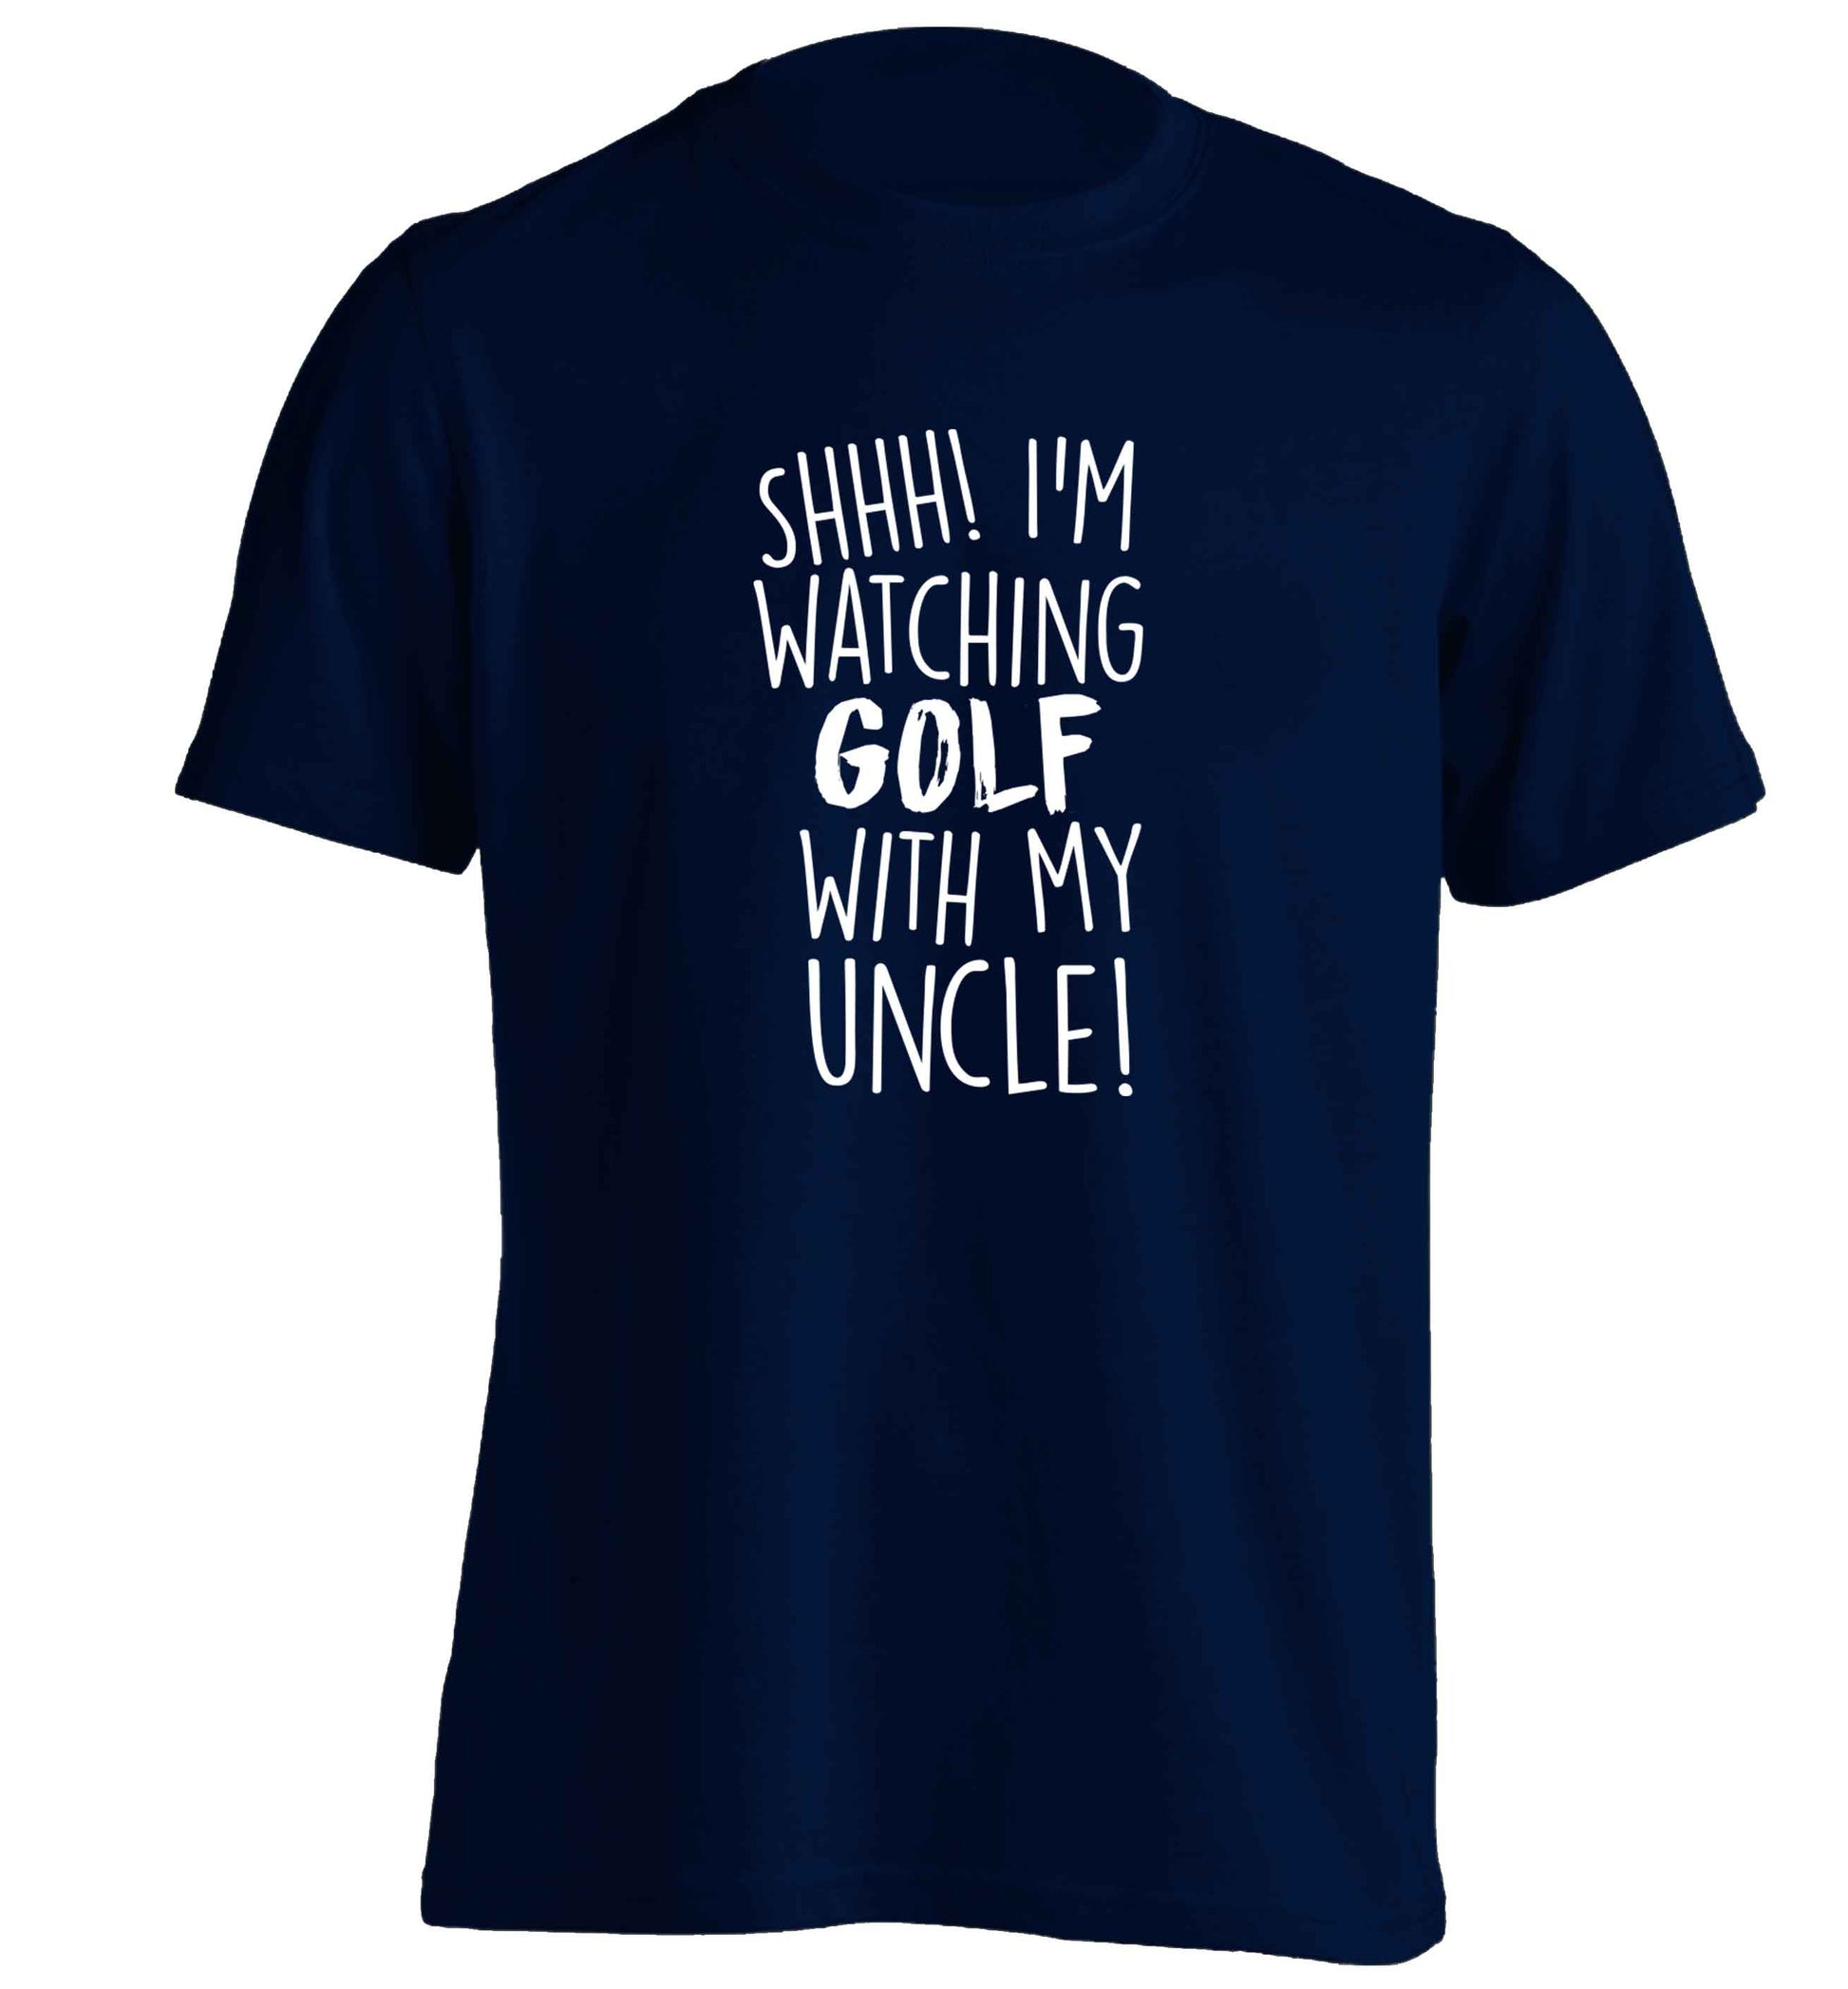 Shh I'm watching golf with my uncle adults unisex navy Tshirt 2XL